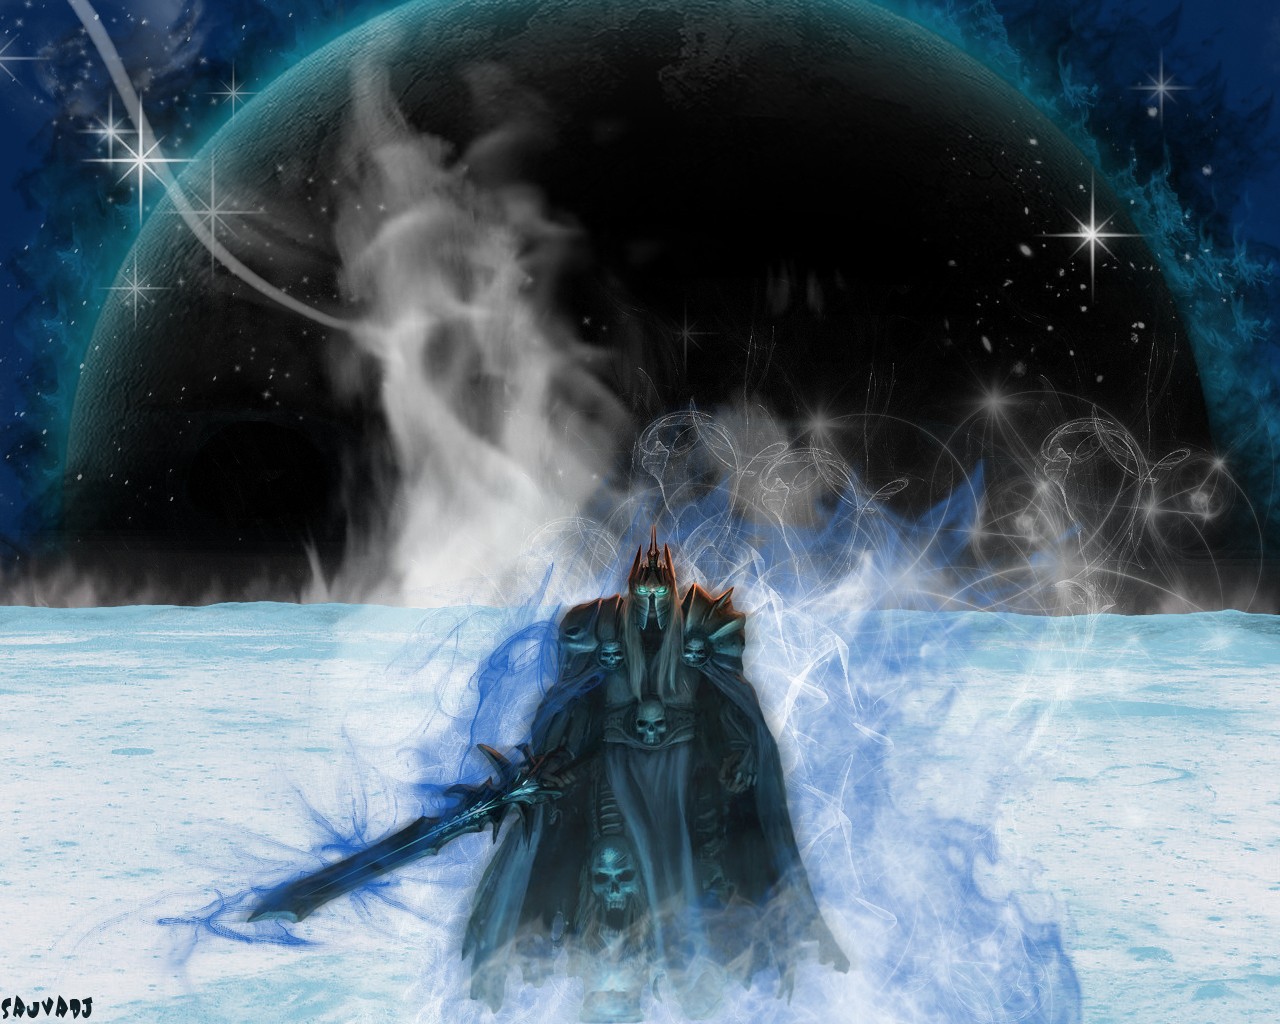 World Of Warcraft Video Games World Of Warcraft Wrath Of The Lich King Arthas Menethil 1280x1024